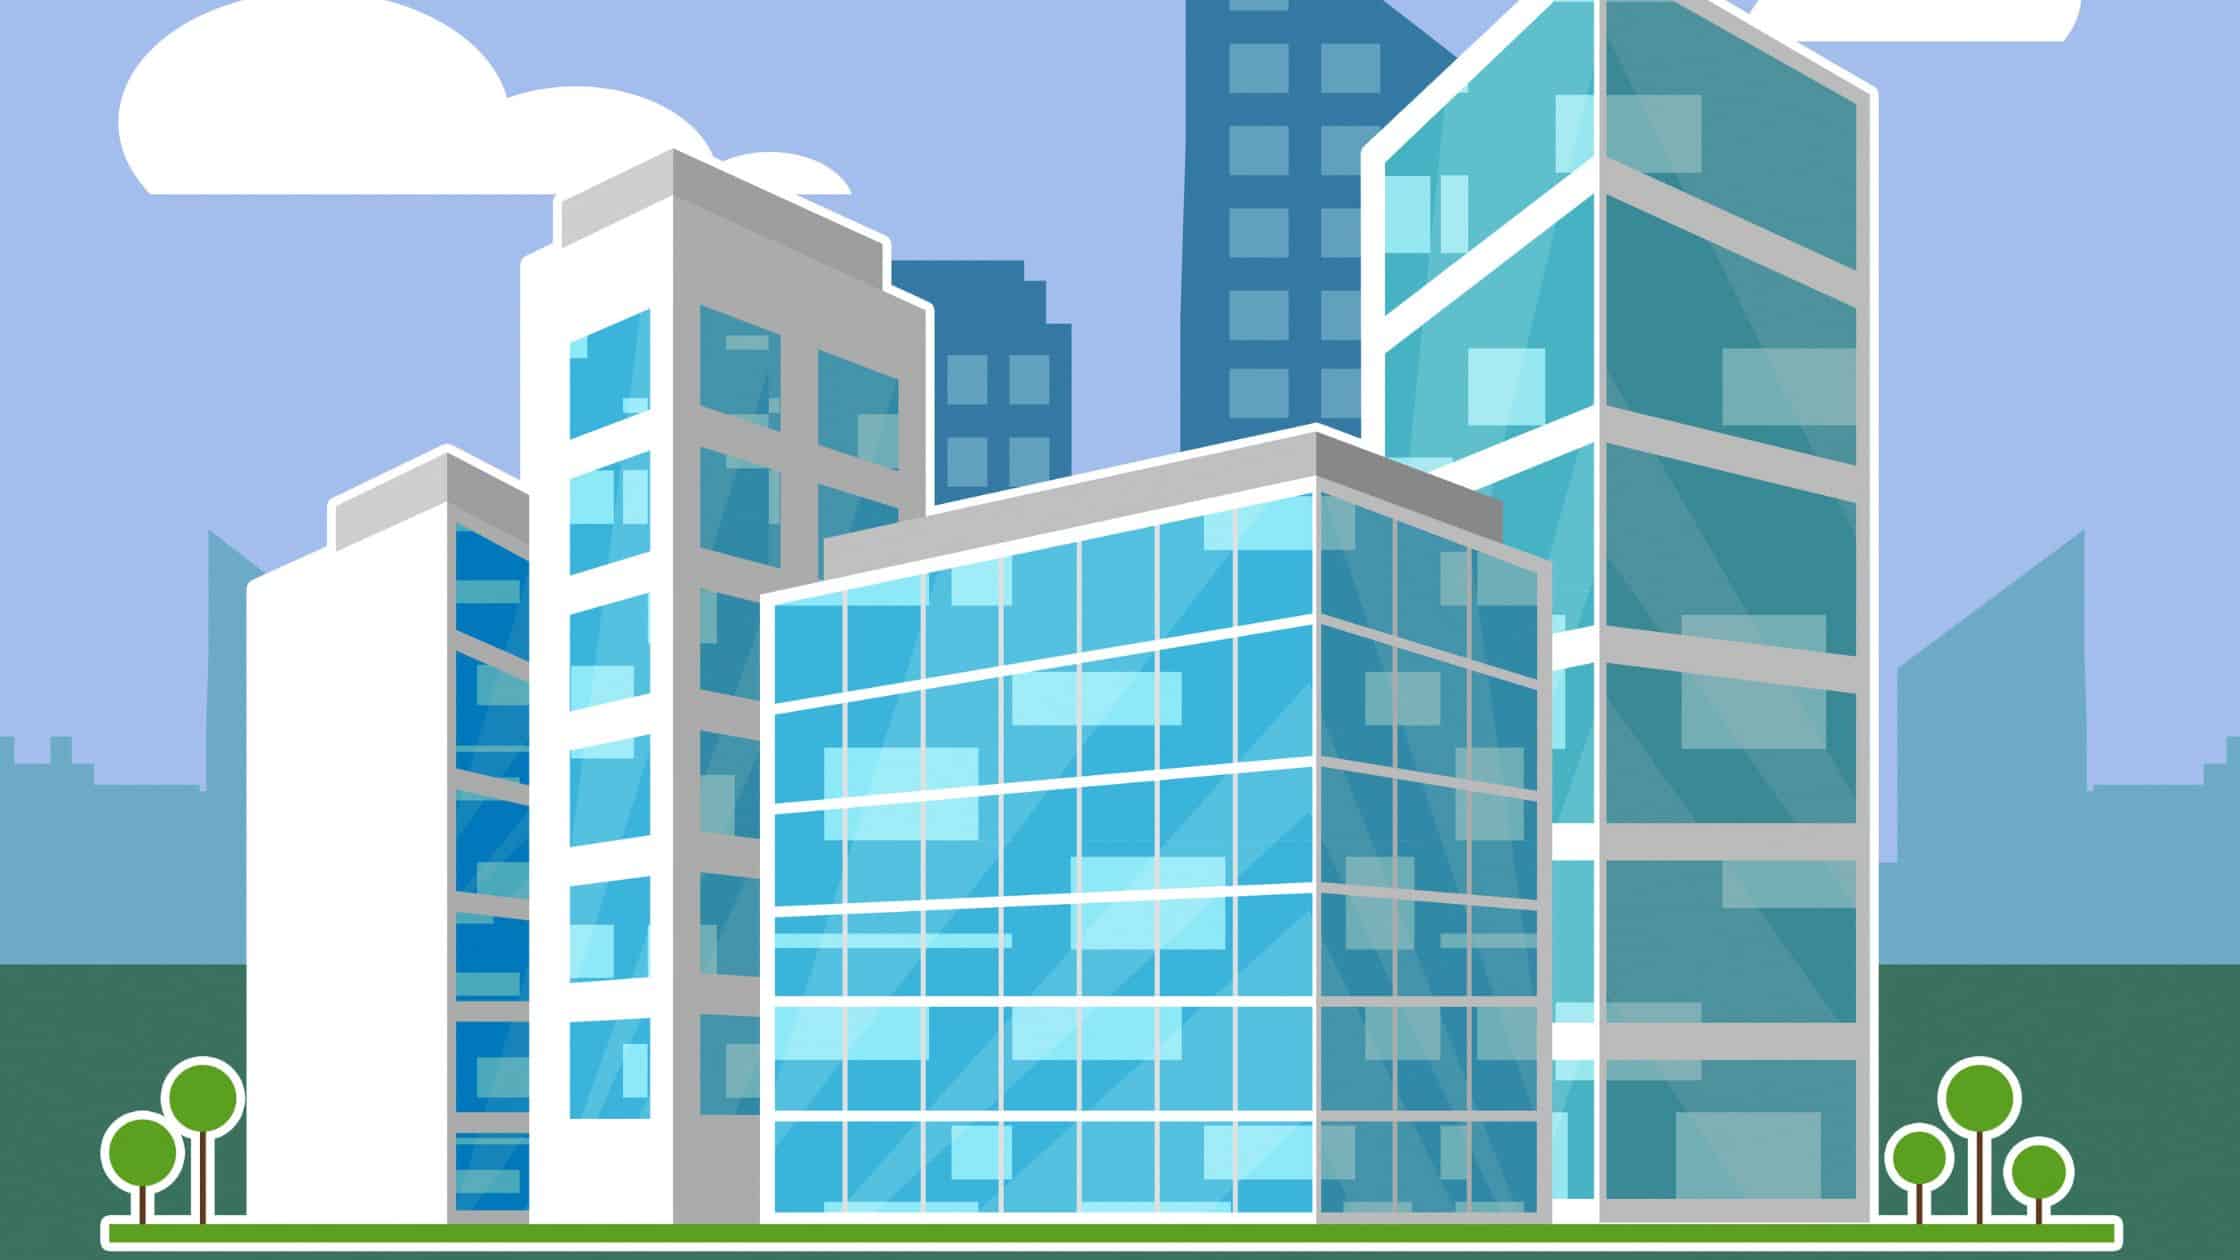 Pros And Cons Of Investing In Commercial Real Estate - blog banner -193 KB 2240 by 1260 pixels- jpg